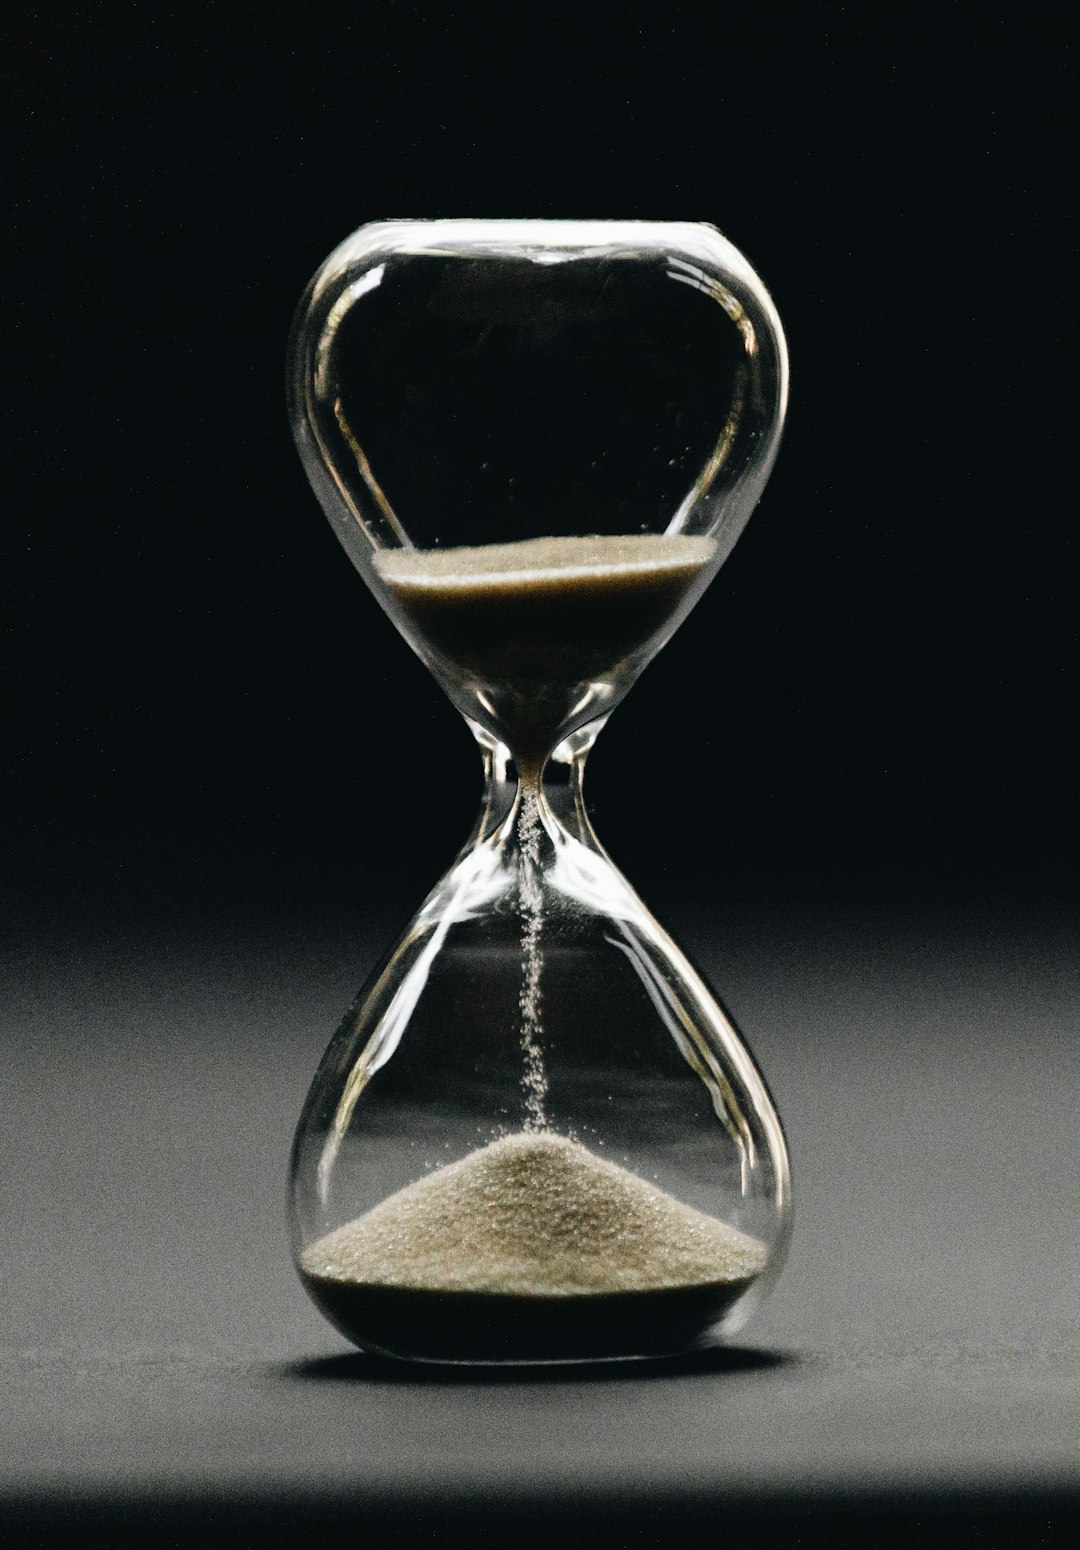 Time is Running Out for LegalKey - featured image